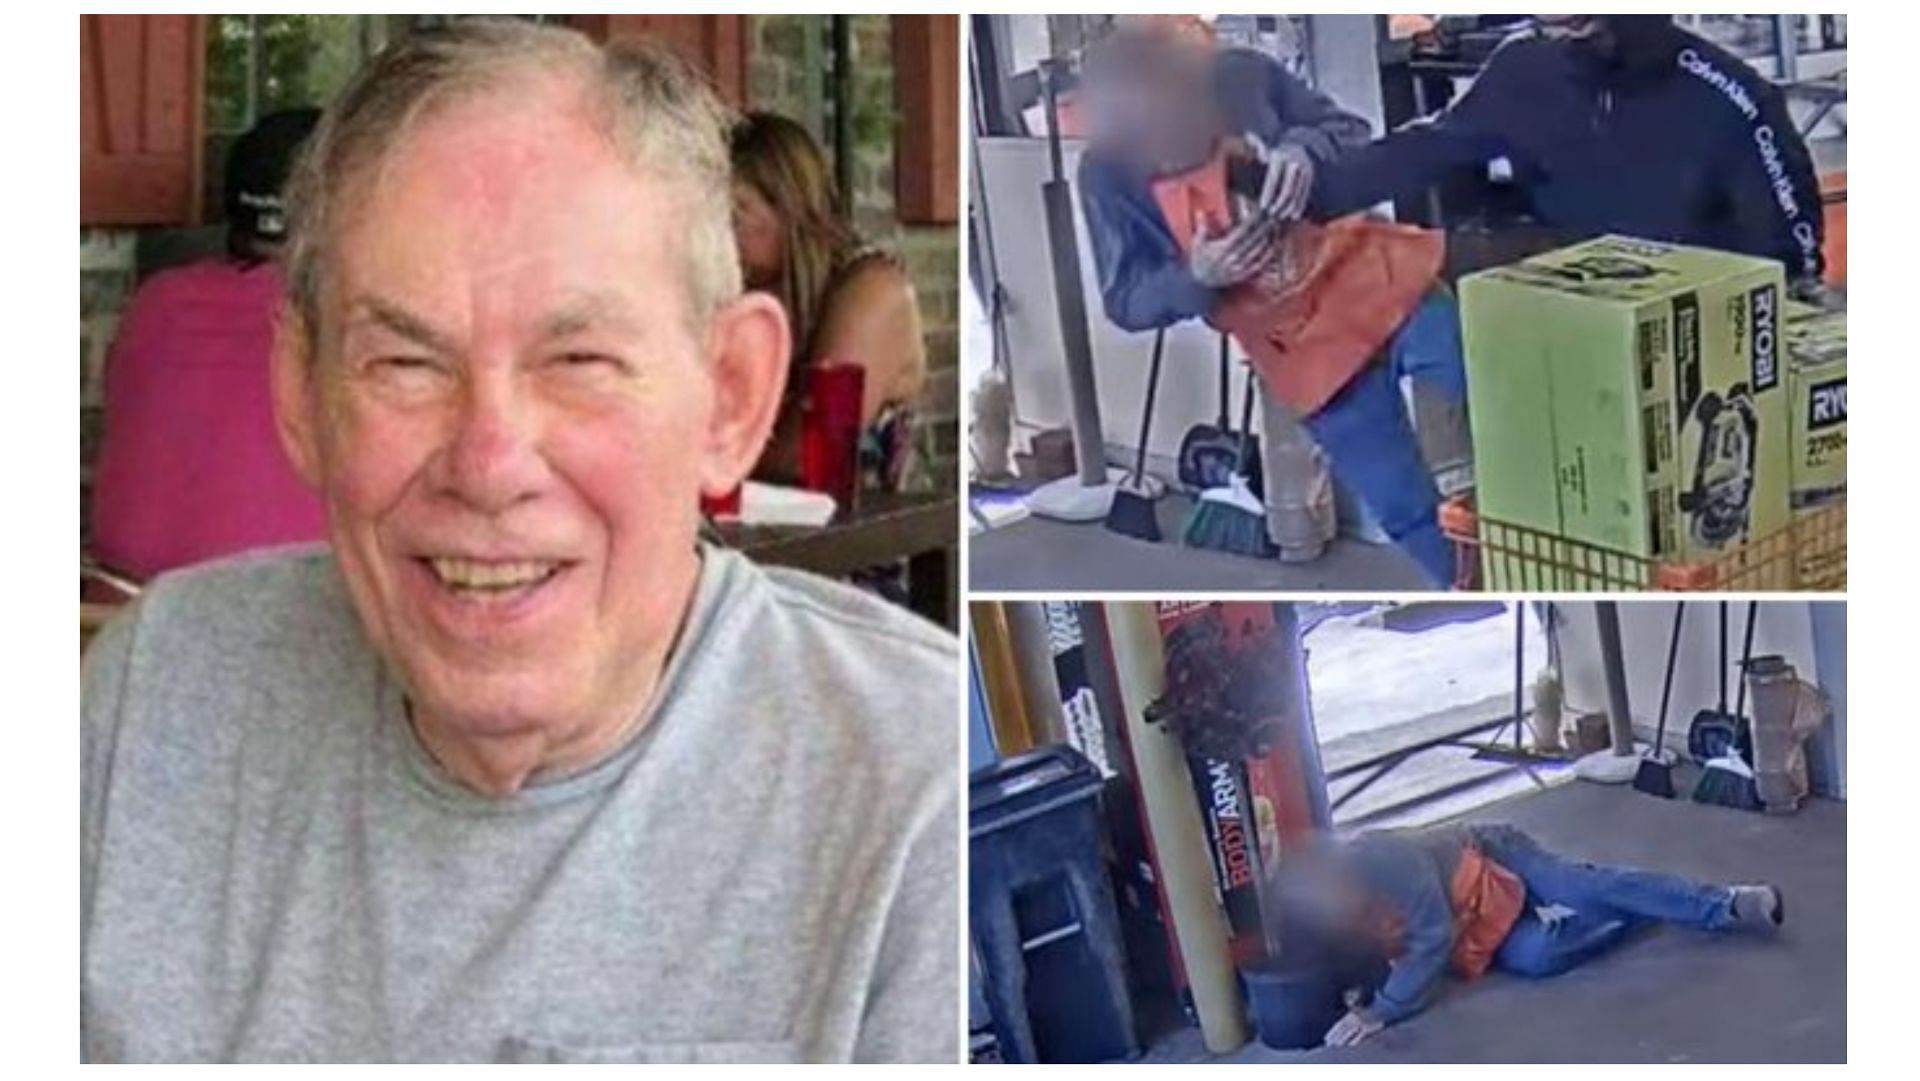 83-year-old Gary Rasor dies after being tossed on the ground by shoplifter, (Image via Caesar A. Schanzenbach/Twitter)